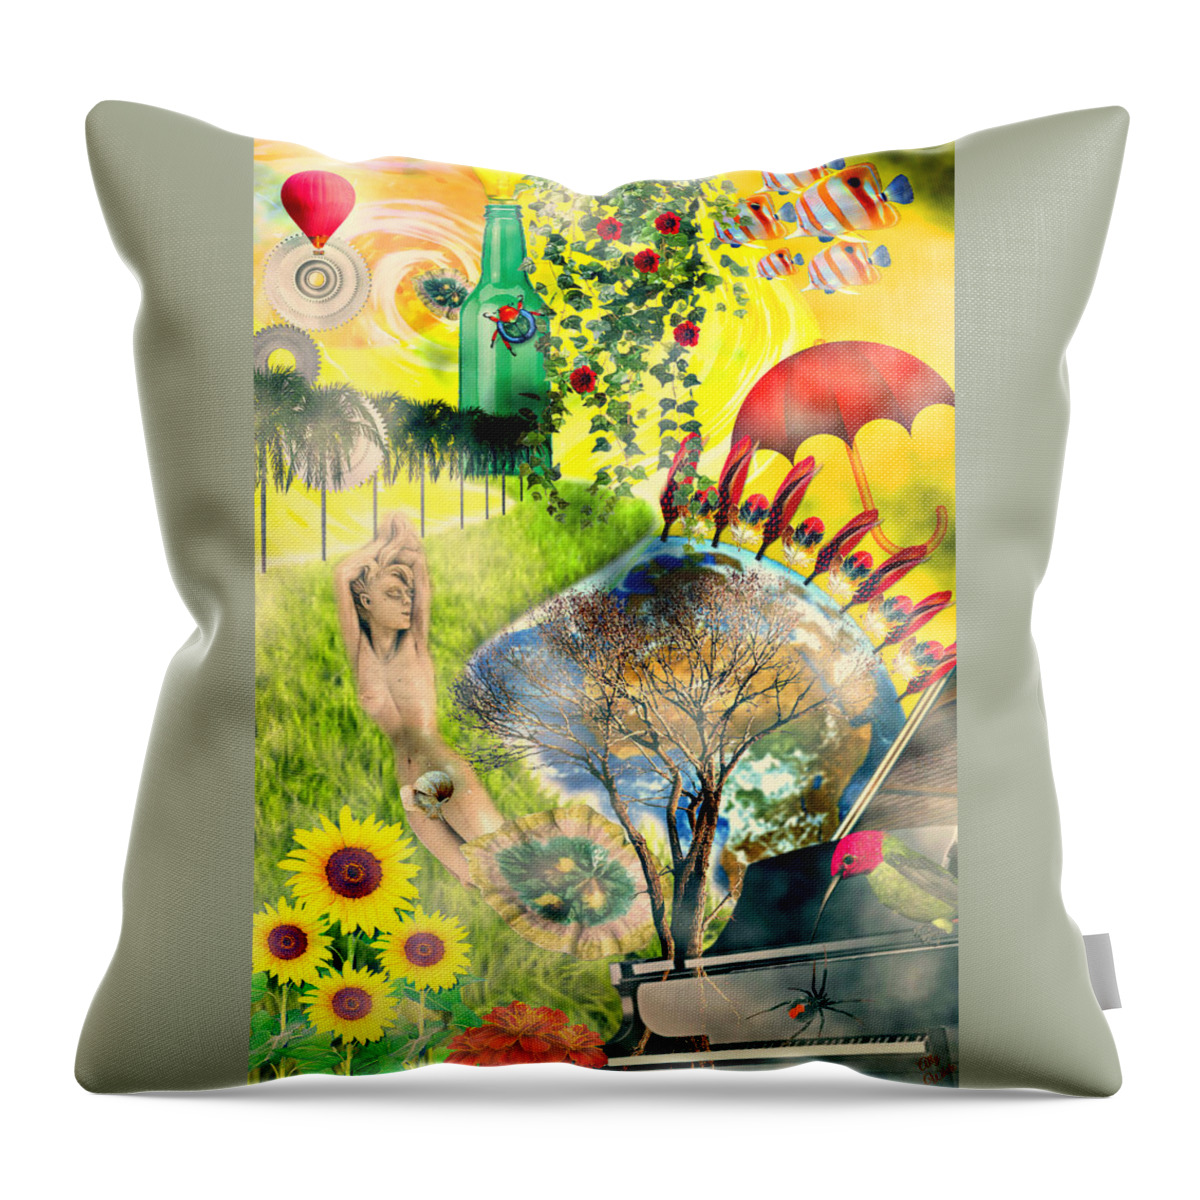 Surreal Throw Pillow featuring the mixed media Drifting Away by Ally White